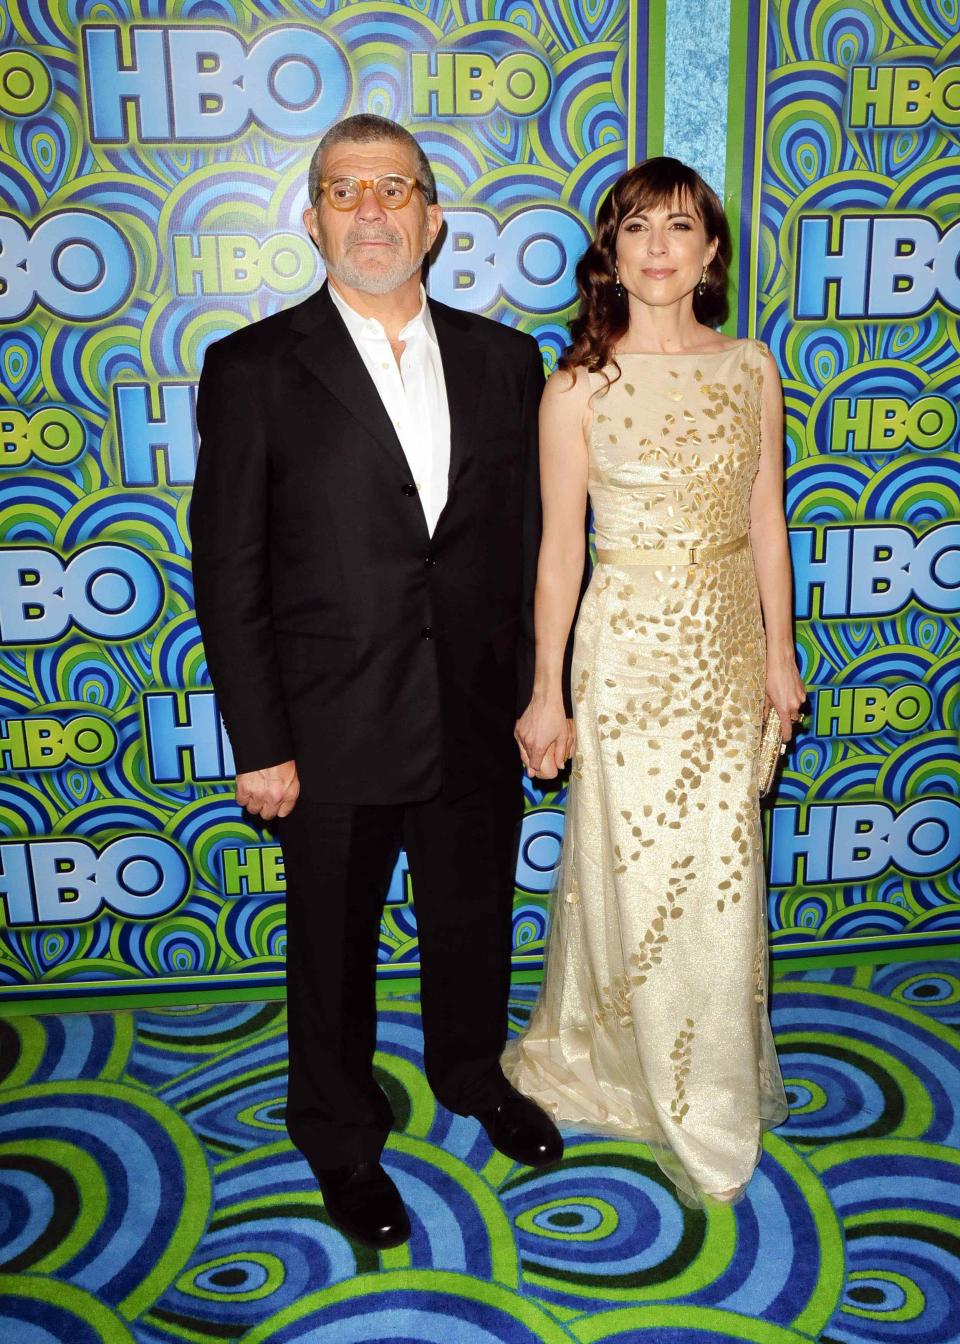 Writer and director David Mamet and his wife actress Rebecca Pidgeon arrive at the 65th Primetime Emmy Awards HBO after-party in West Hollywood